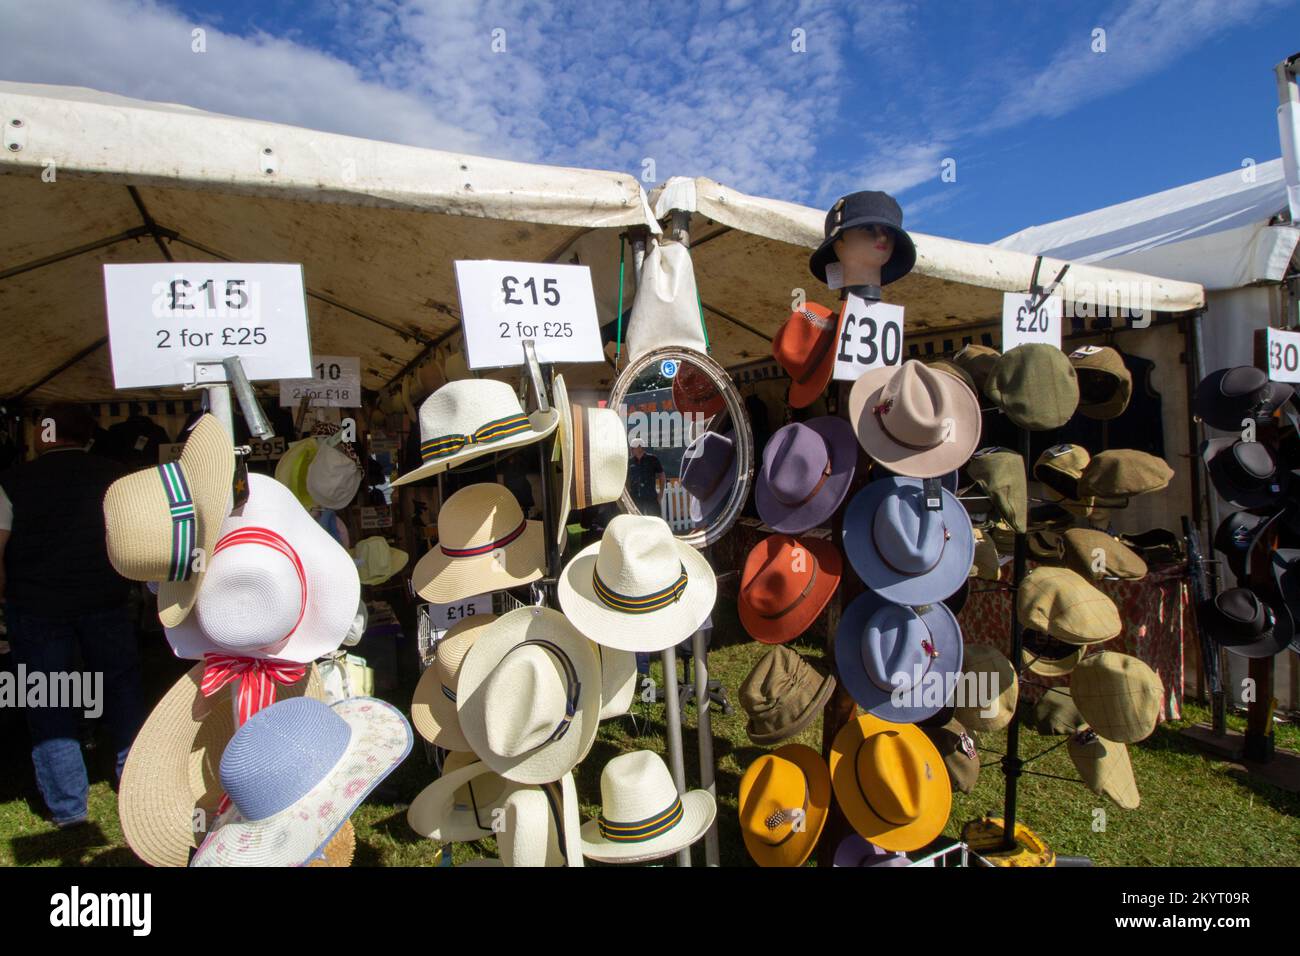 EXETER, DEVON, UK - JULY 1, 2022 trade stand -  Hats Stock Photo